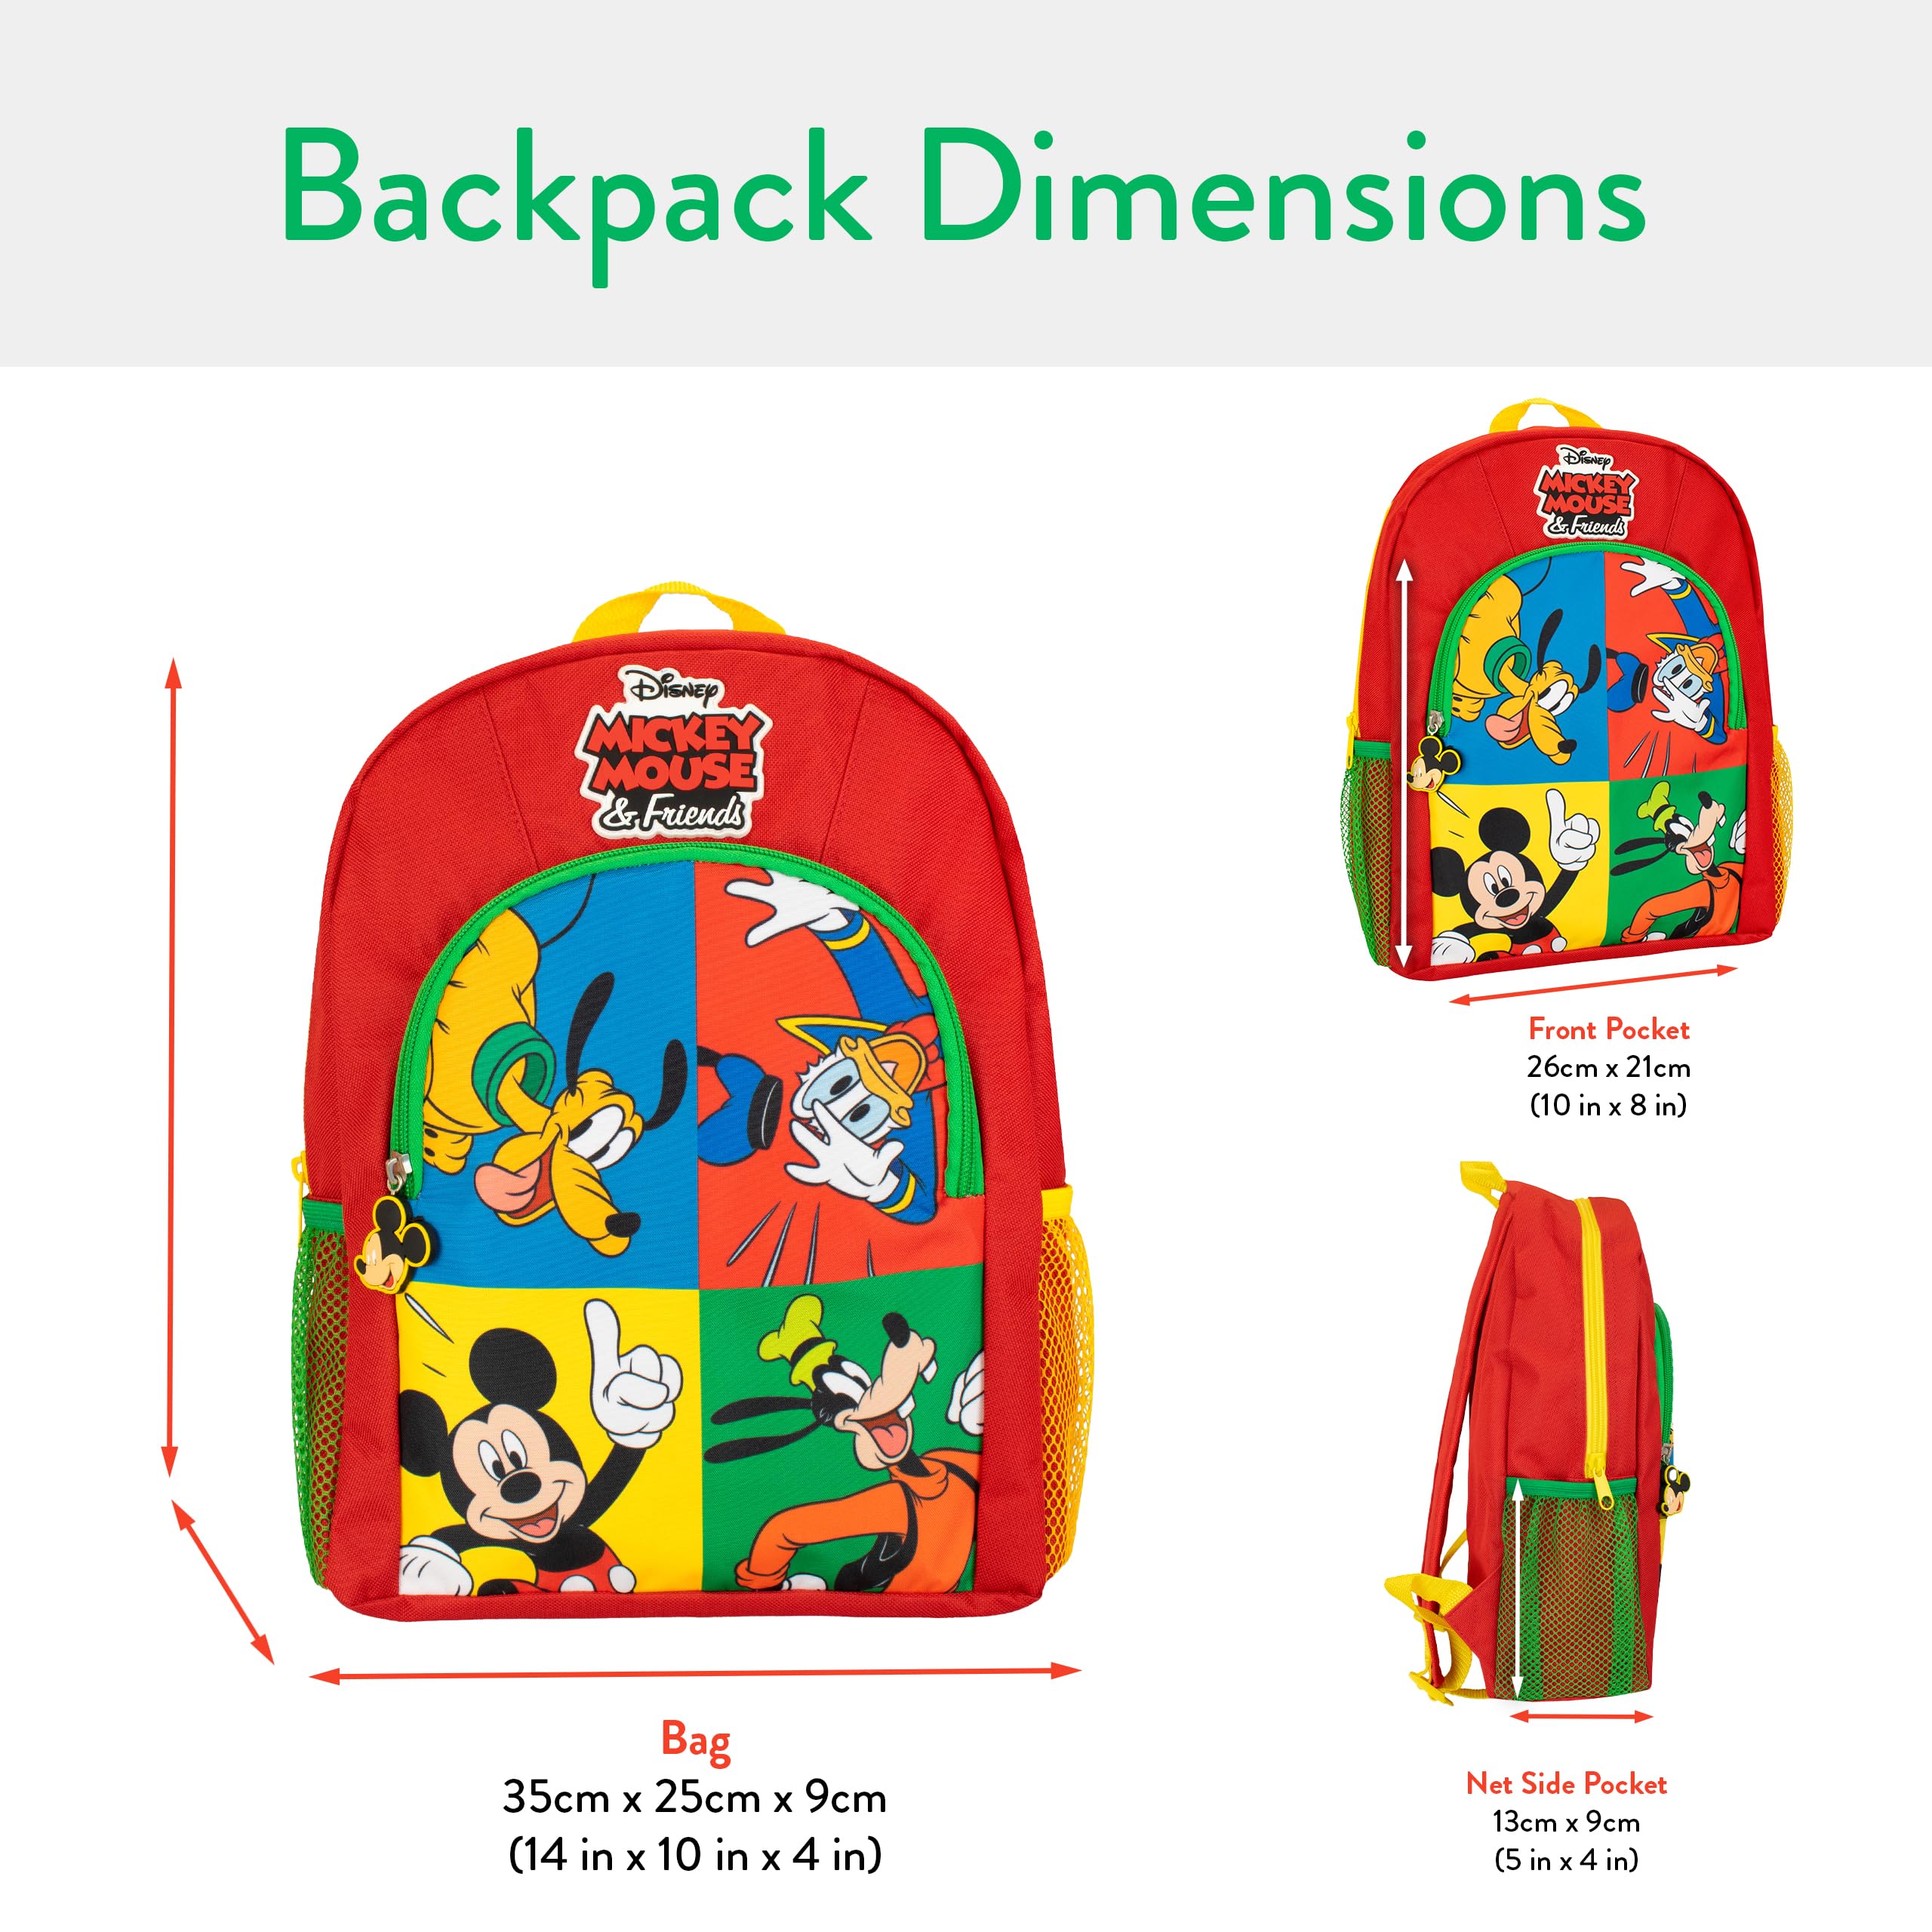 Disney Boys Mickey Mouse Pluto Donald Duck and Goofy Backpack